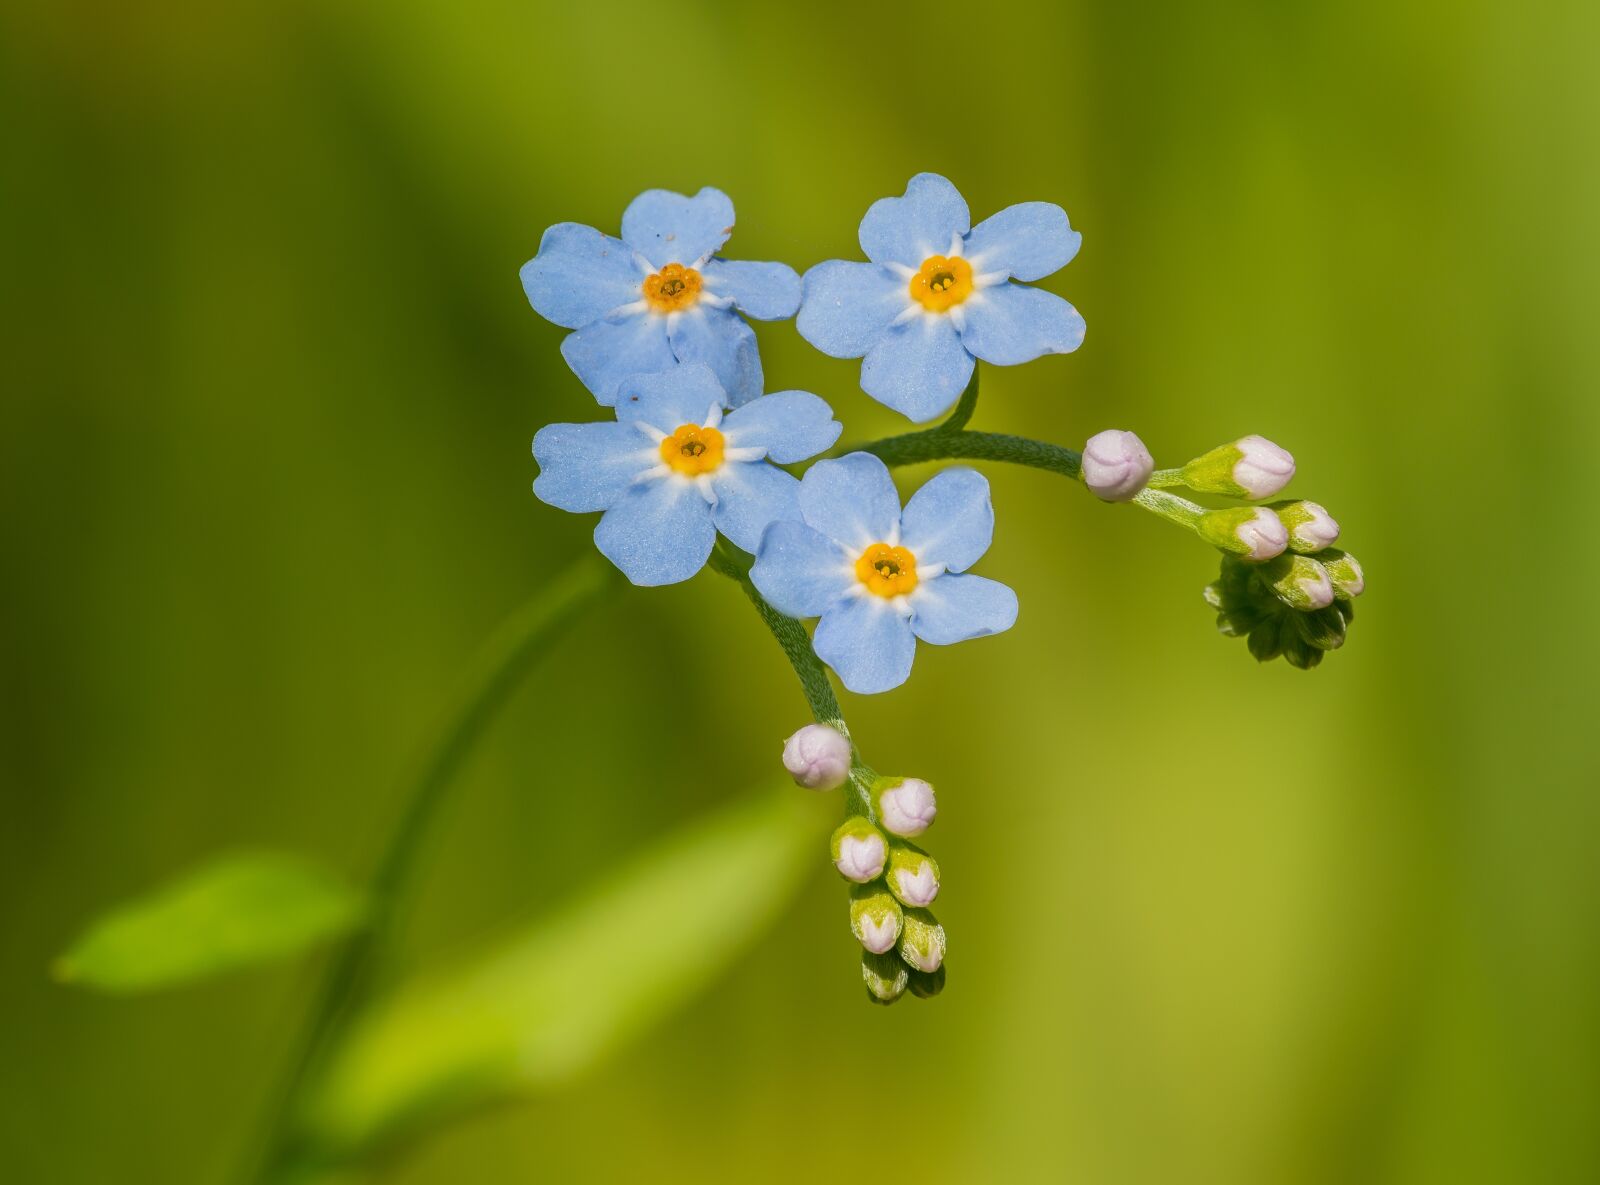 Nikon D800E sample photo. Forget-me-not, flower, flowers photography